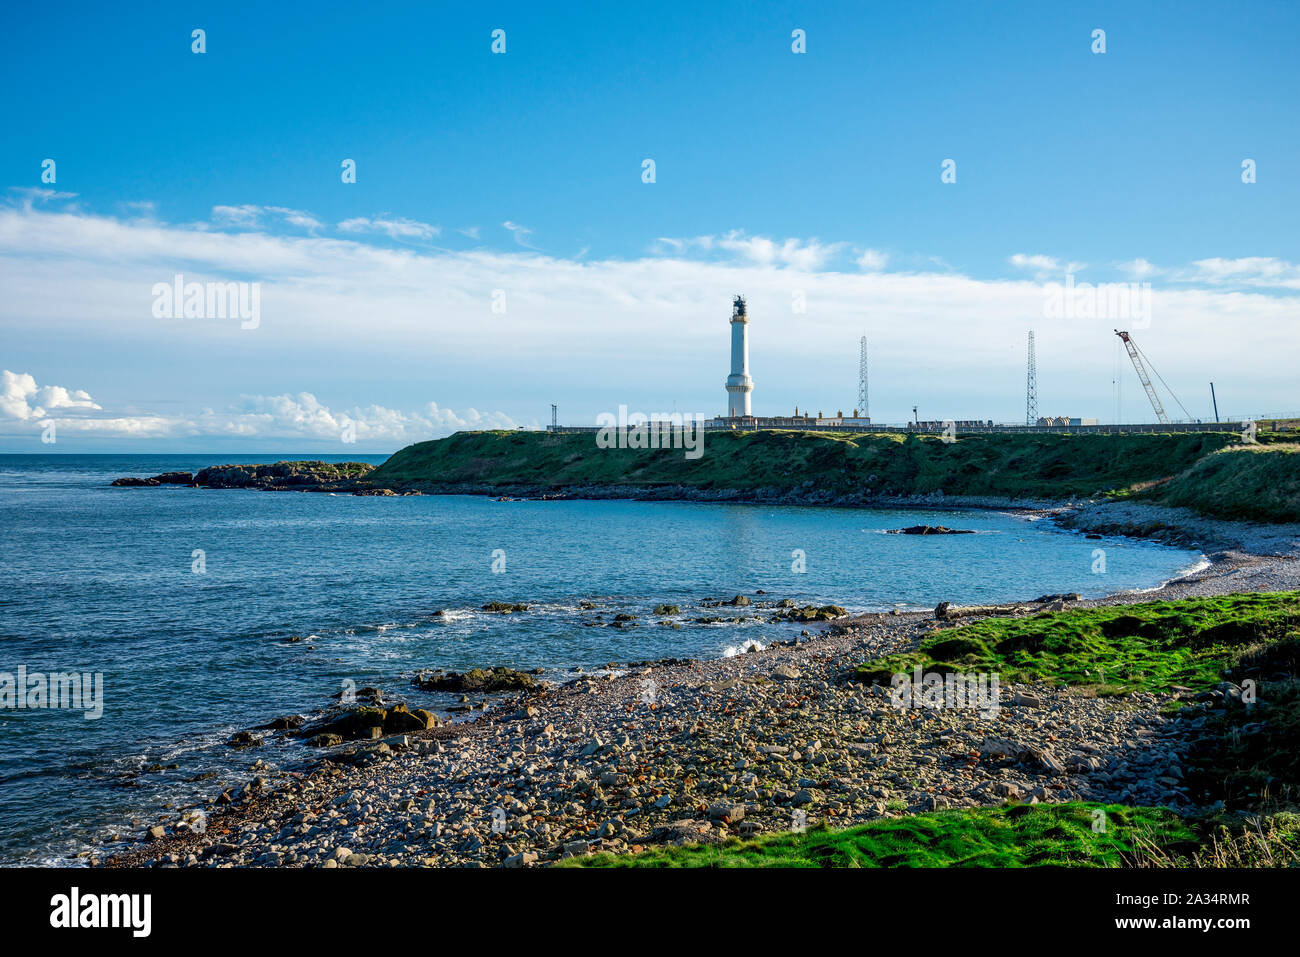 A view to lighthouse Girdle Ness from a rocky pebble beach near it, Aberdeen, Scotland Stock Photo